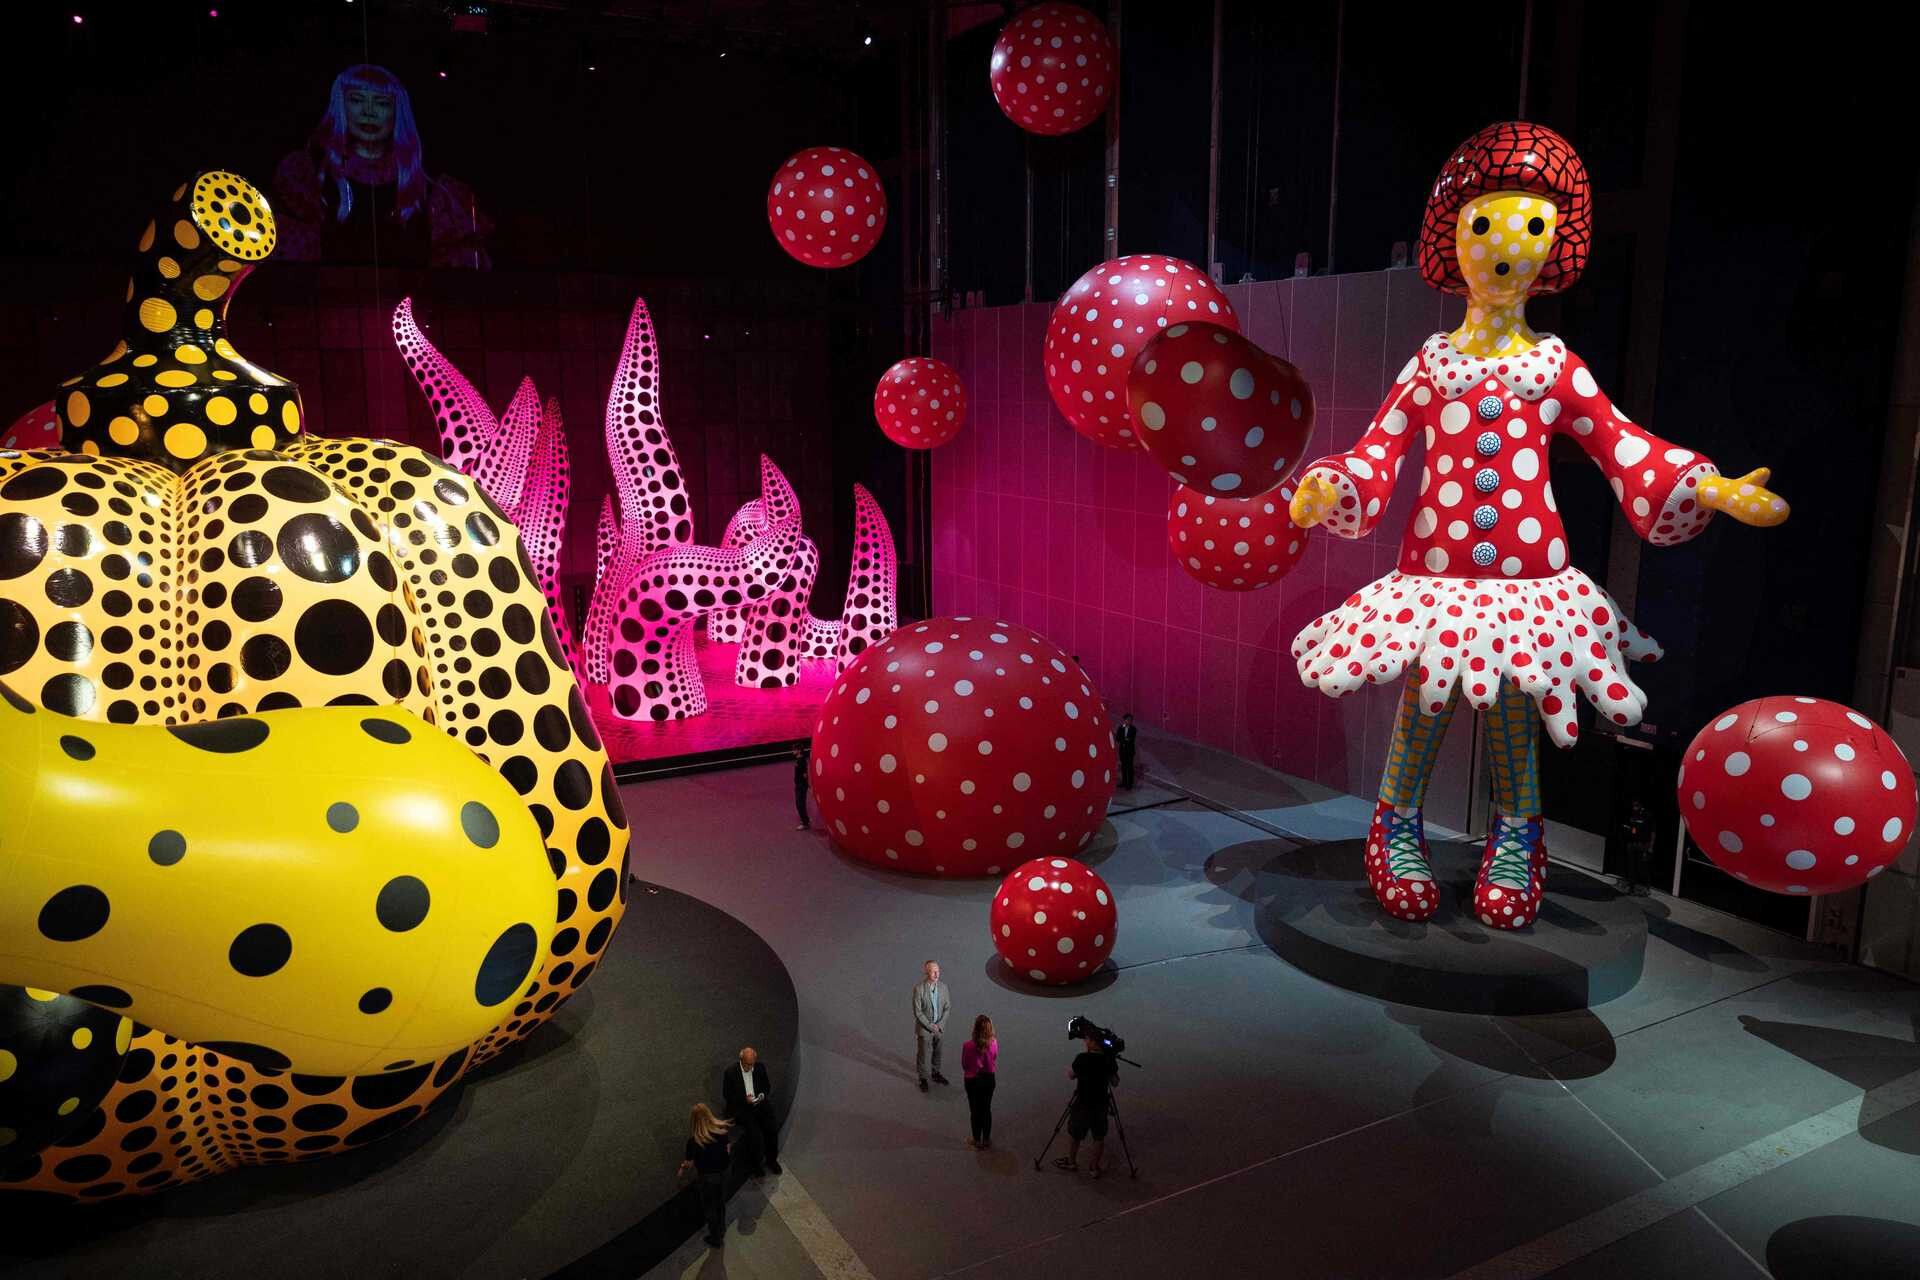 Japanese Yayoi Kusama comes to Porto and the rest is a revolution